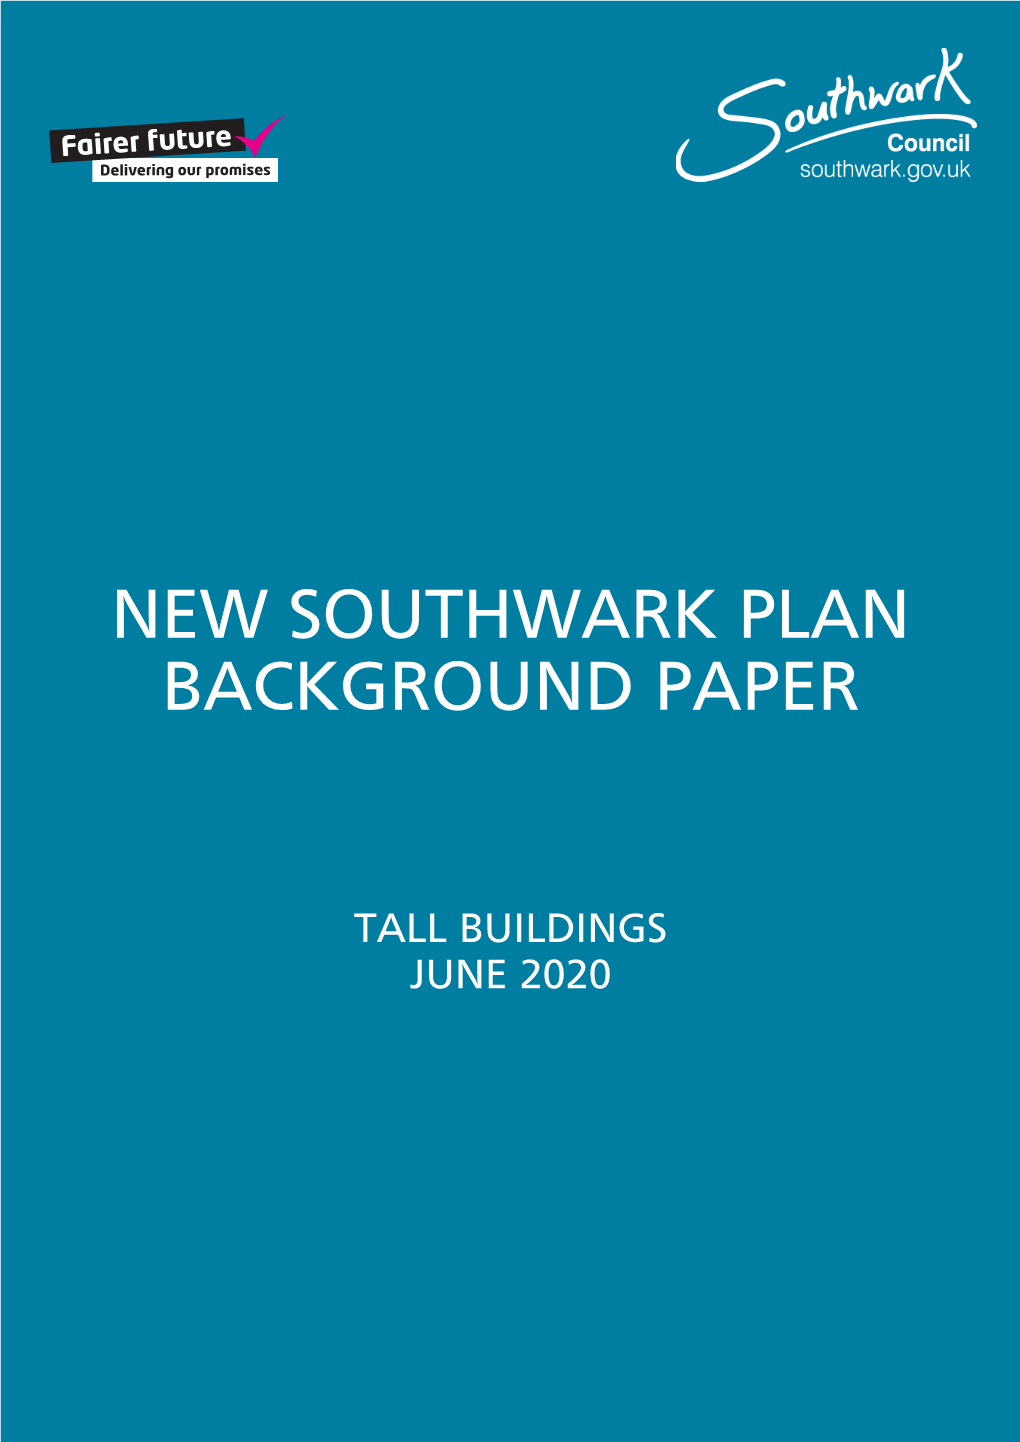 TALL BUILDINGS BACKGROUND PAPER 1 1.2 Scope of Background Paper This Paper Covers the Entirety of the London Borough of Southwark, As Seen in Figure 2